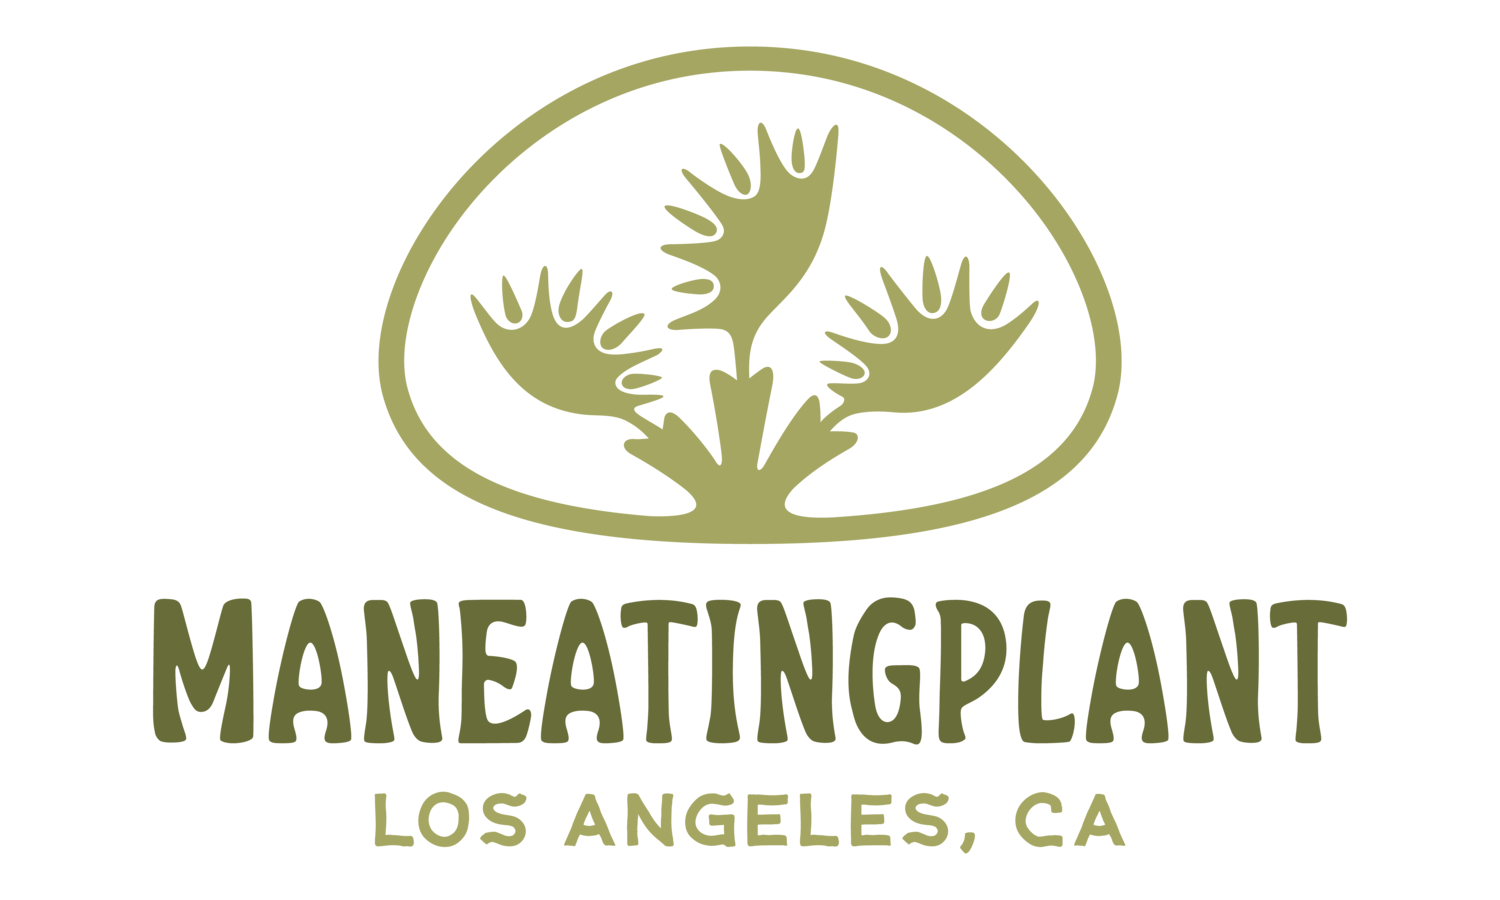 MANEATINGPLANT Opens First Brick-and-Mortar Location at